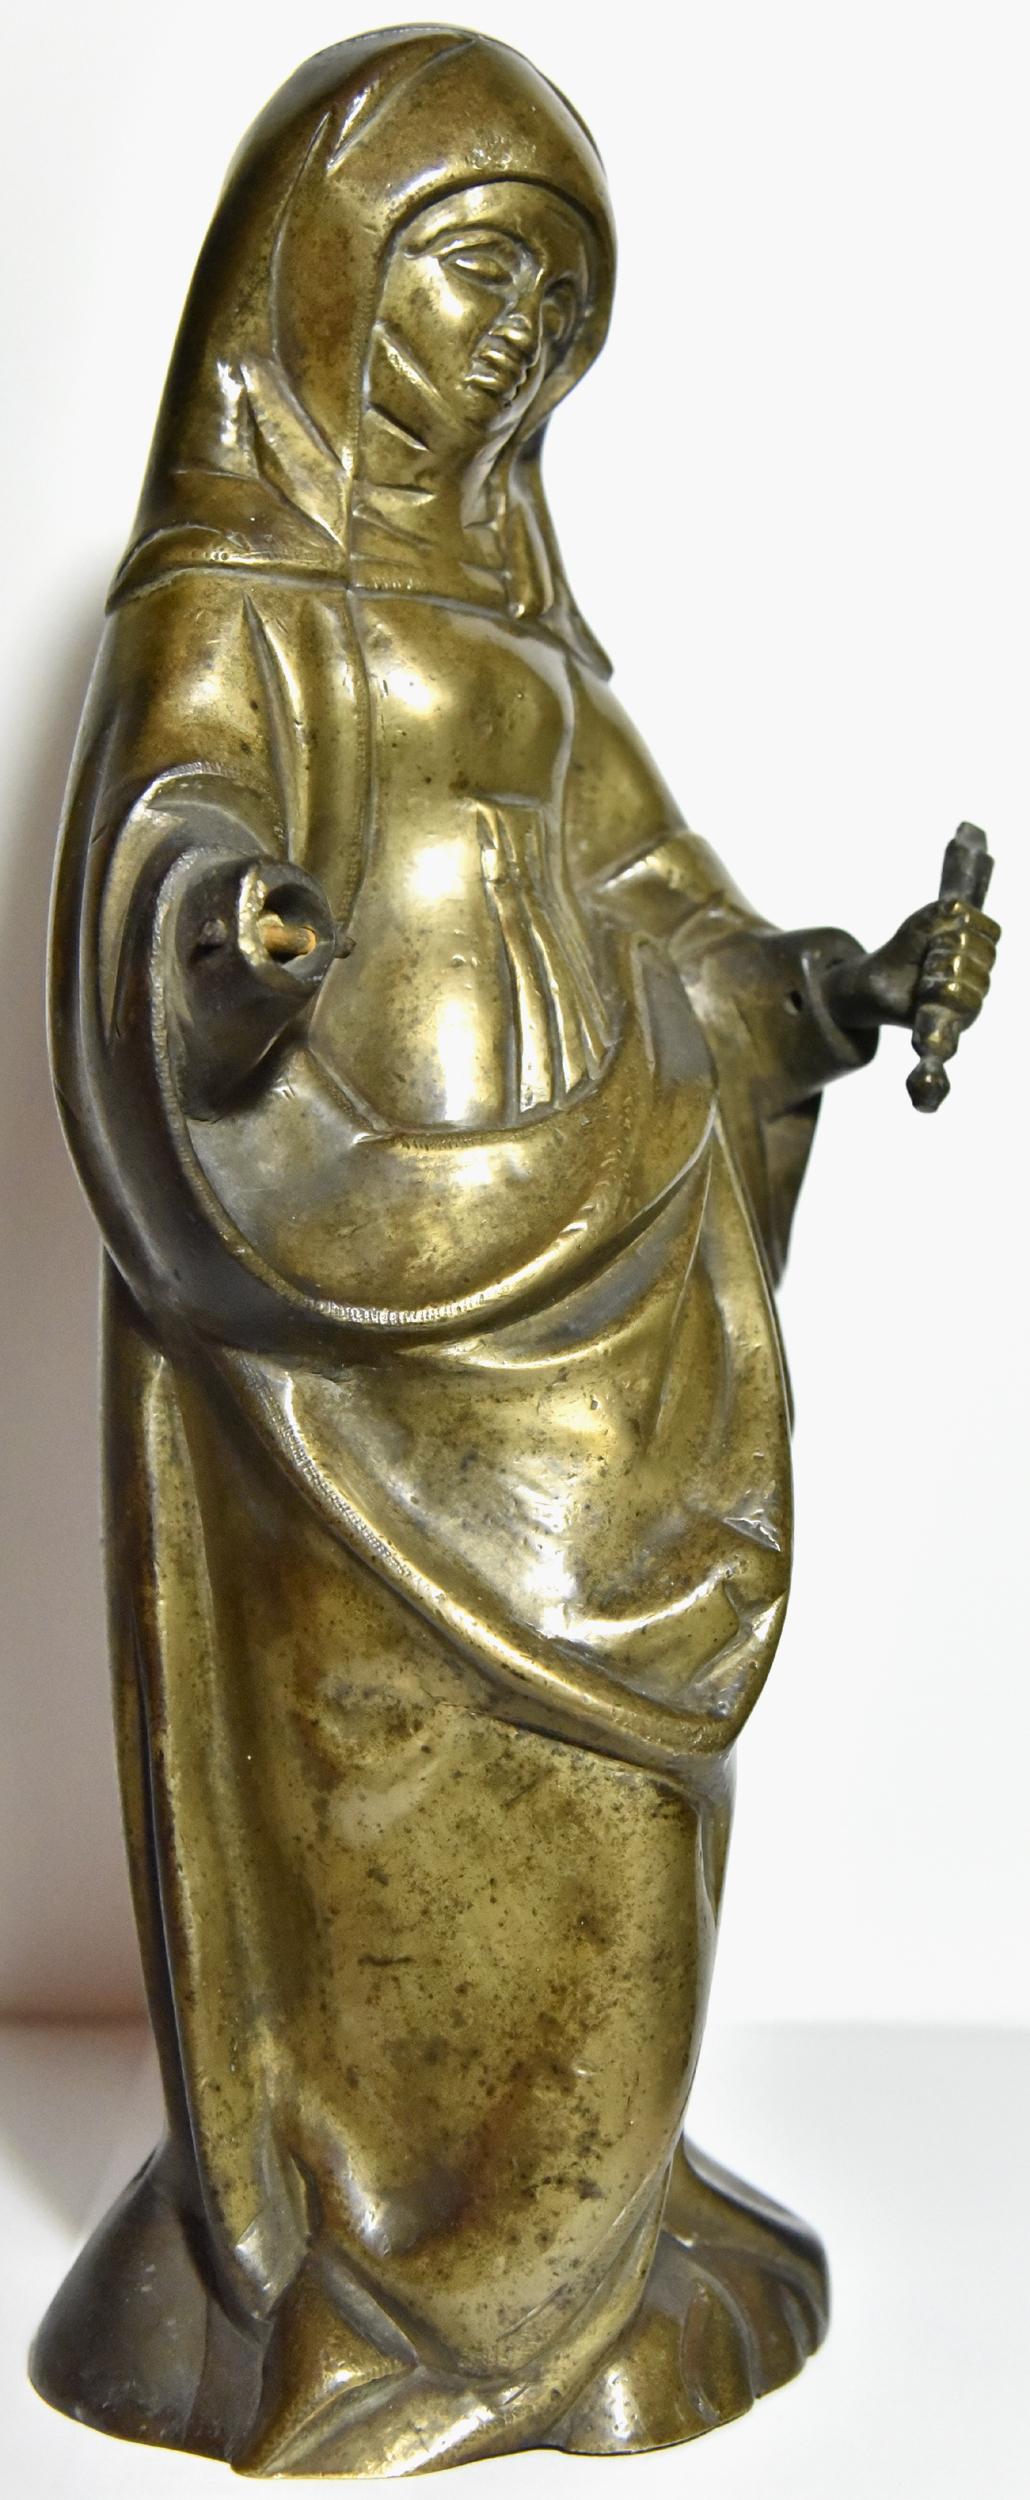 Figure of a saint in bronze, late 15th century, southern Netherlands - Gold Figurative Sculpture by Unknown